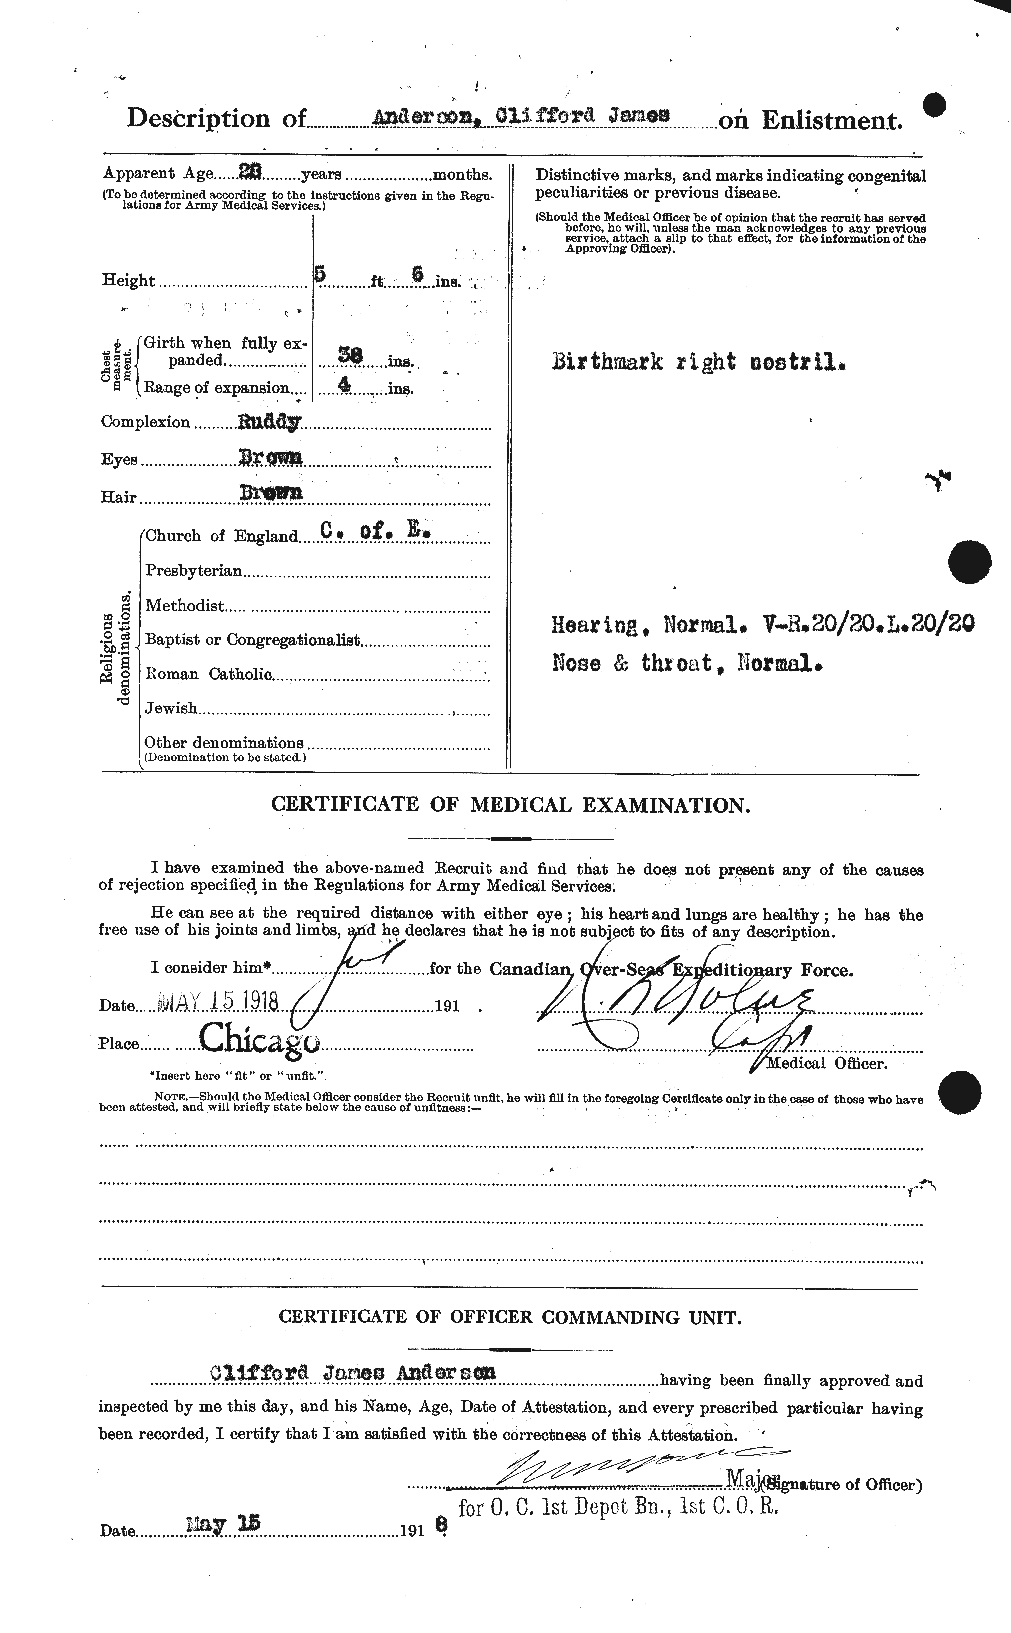 Personnel Records of the First World War - CEF 210061b